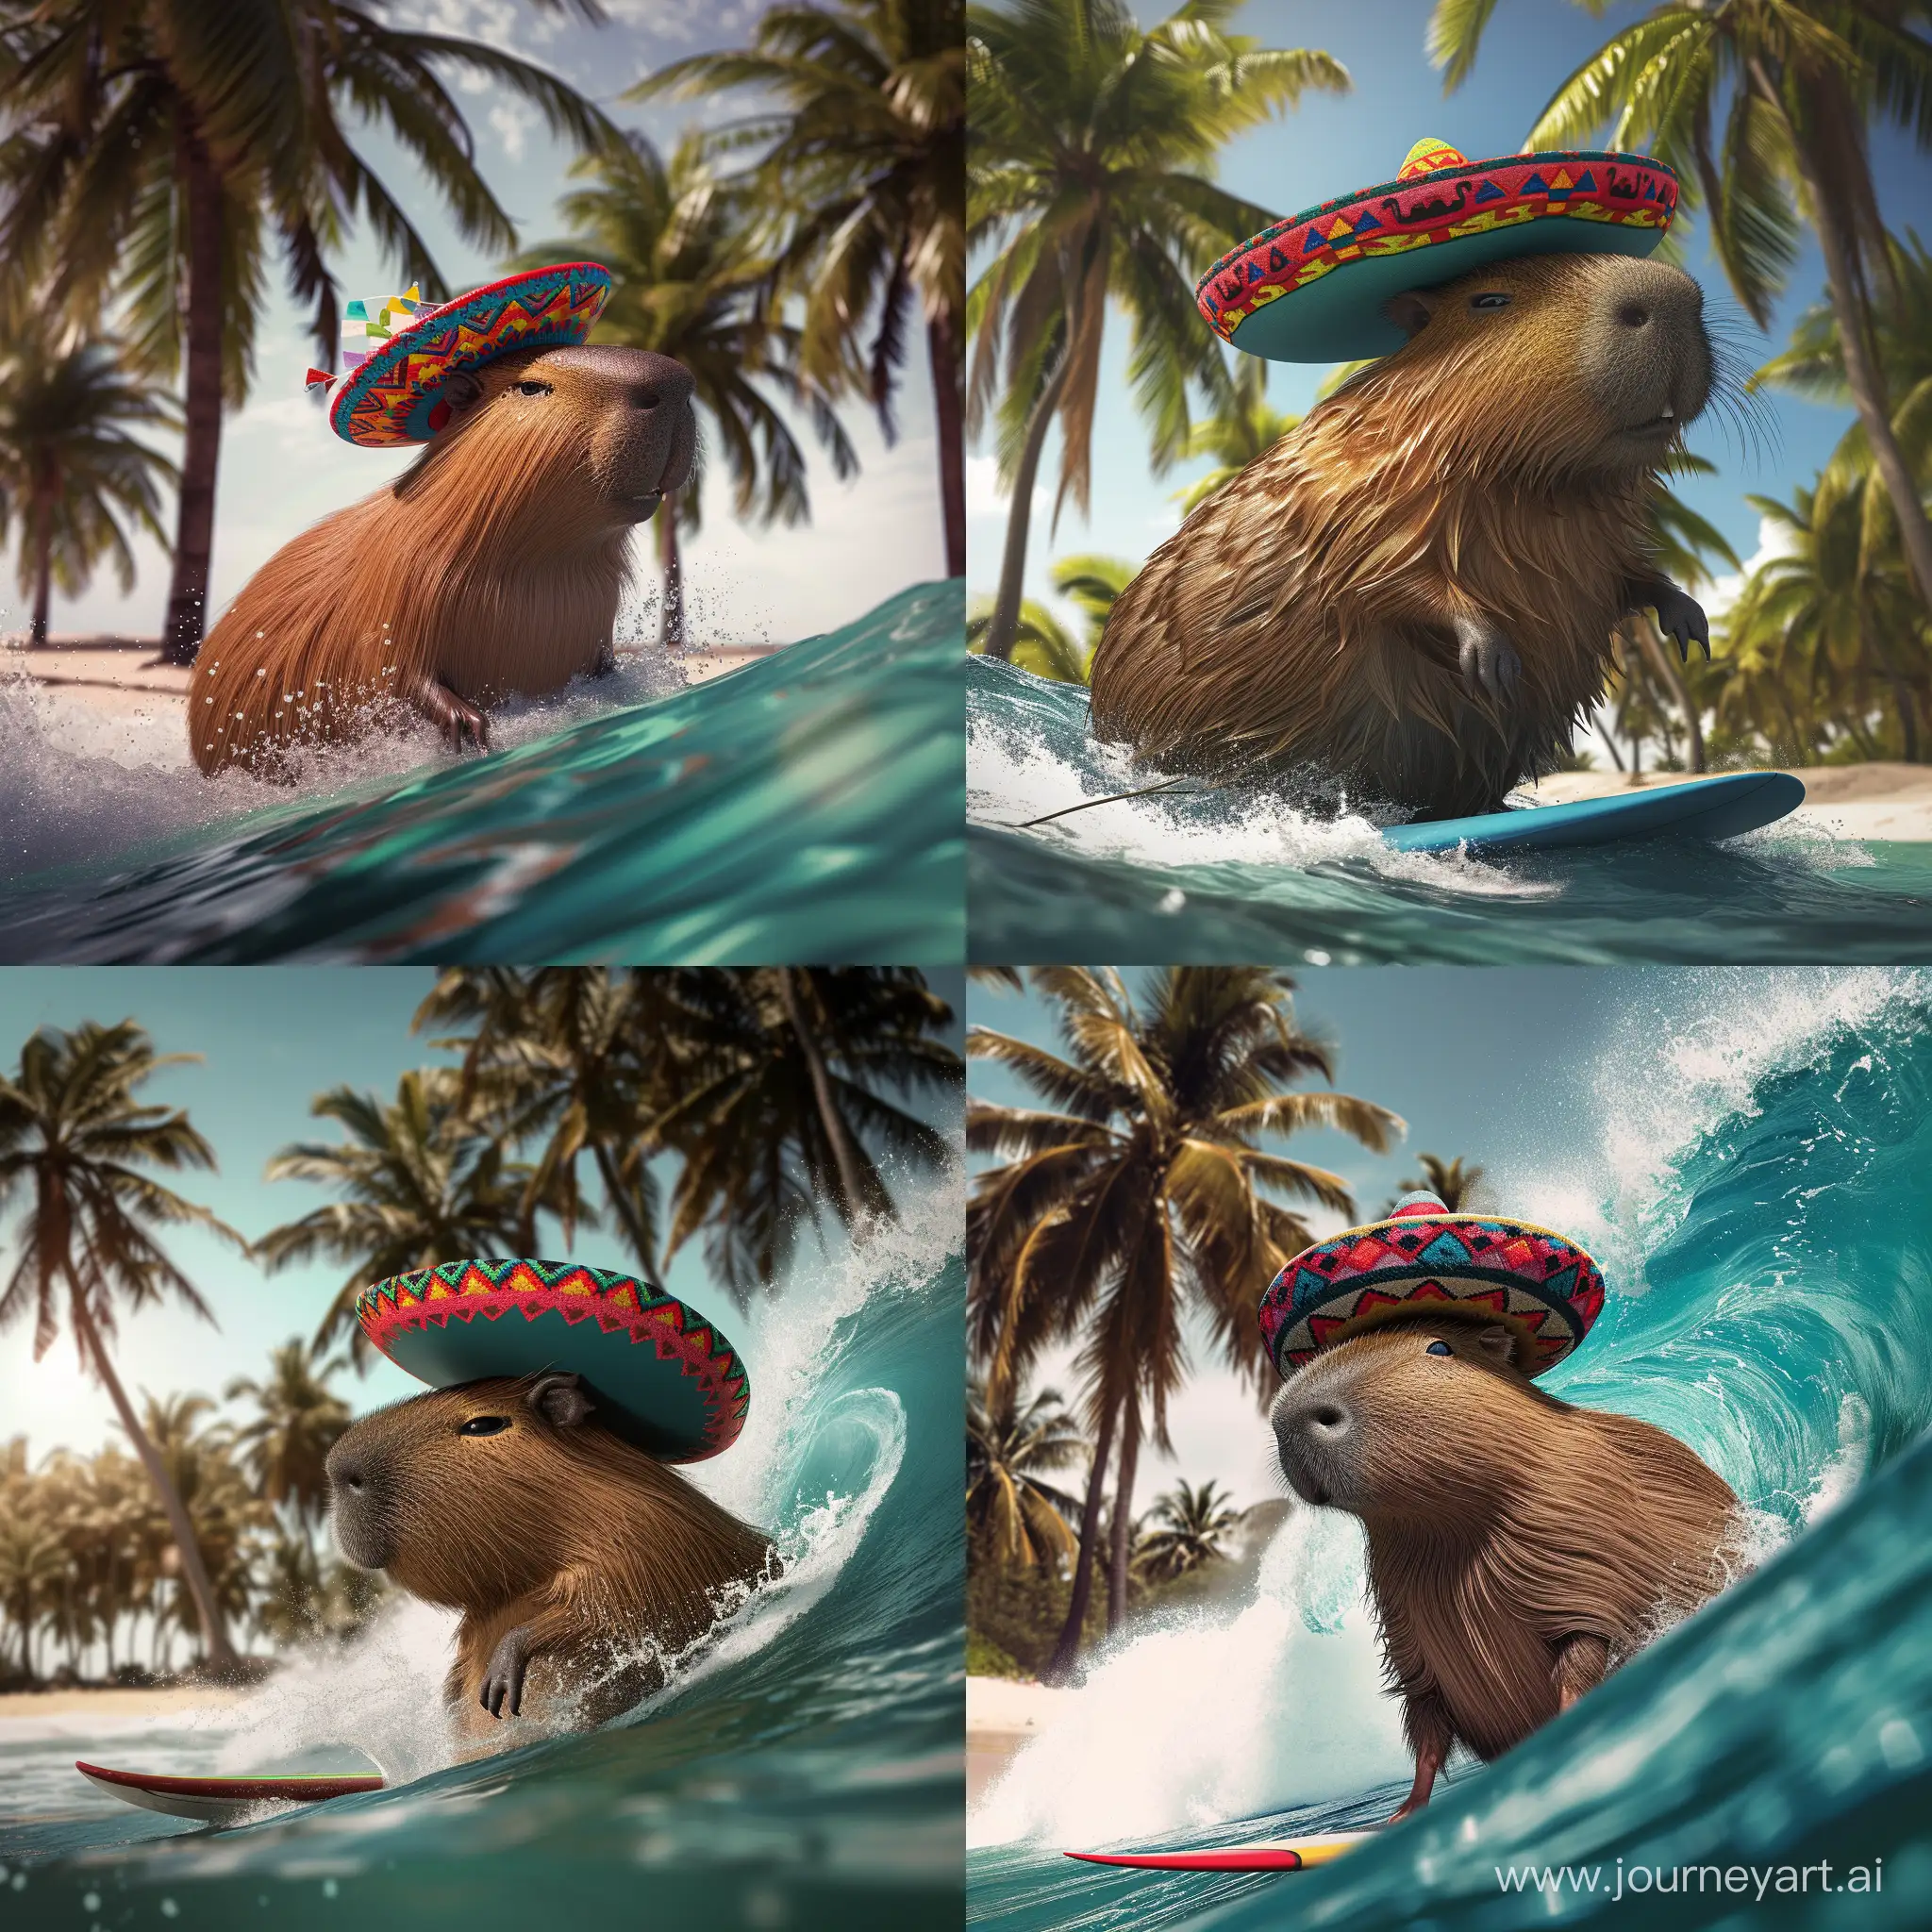 A delightful bright sight on a tropical beach and a realistic fat happy capybara, He surfing on a big wave with colorful Mexican sombrero hat on its head. Palm trees provide the perfect backdrop for this unique encounter. , creating a playfulness to the serene atmosphere. Photo that take with sony a7iii with 50mm lens